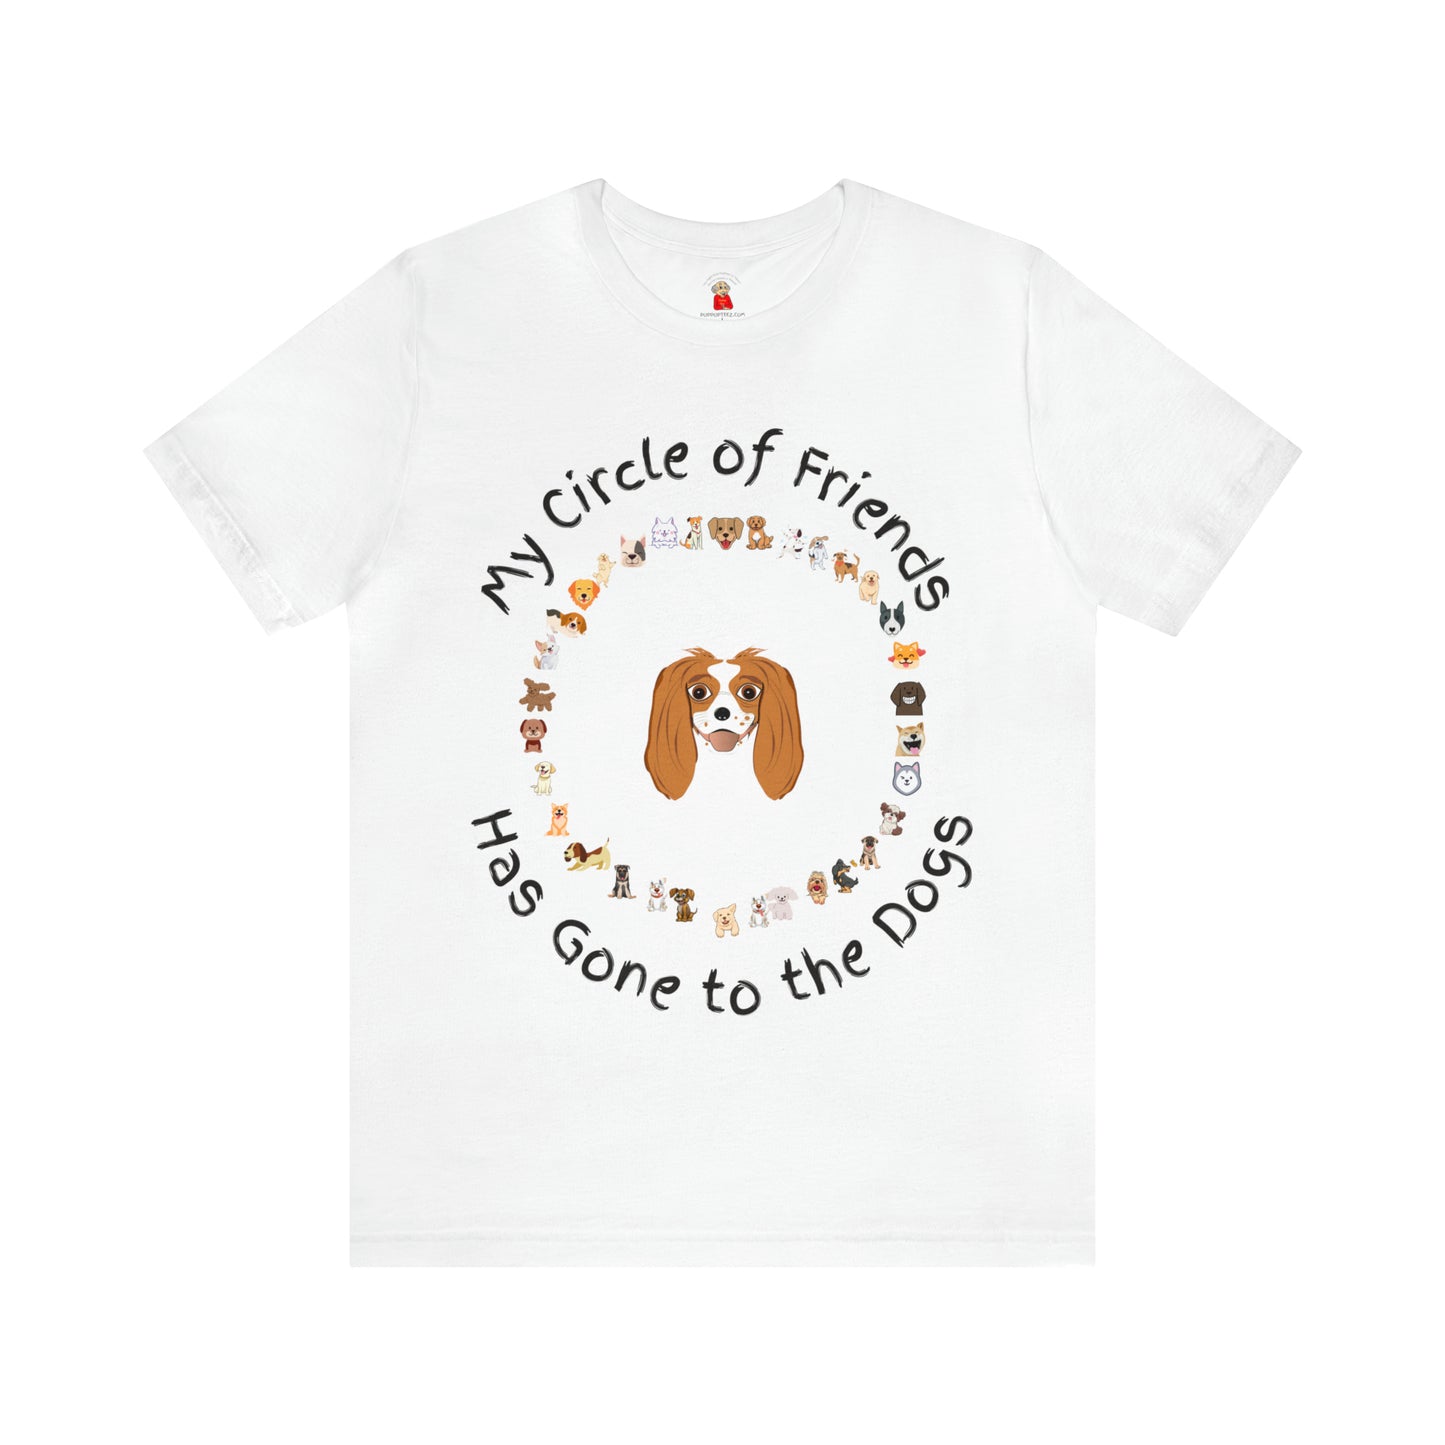 Barney’s Circle of Friends is Going to the Dogs Unisex Jersey Short Sleeve Tee